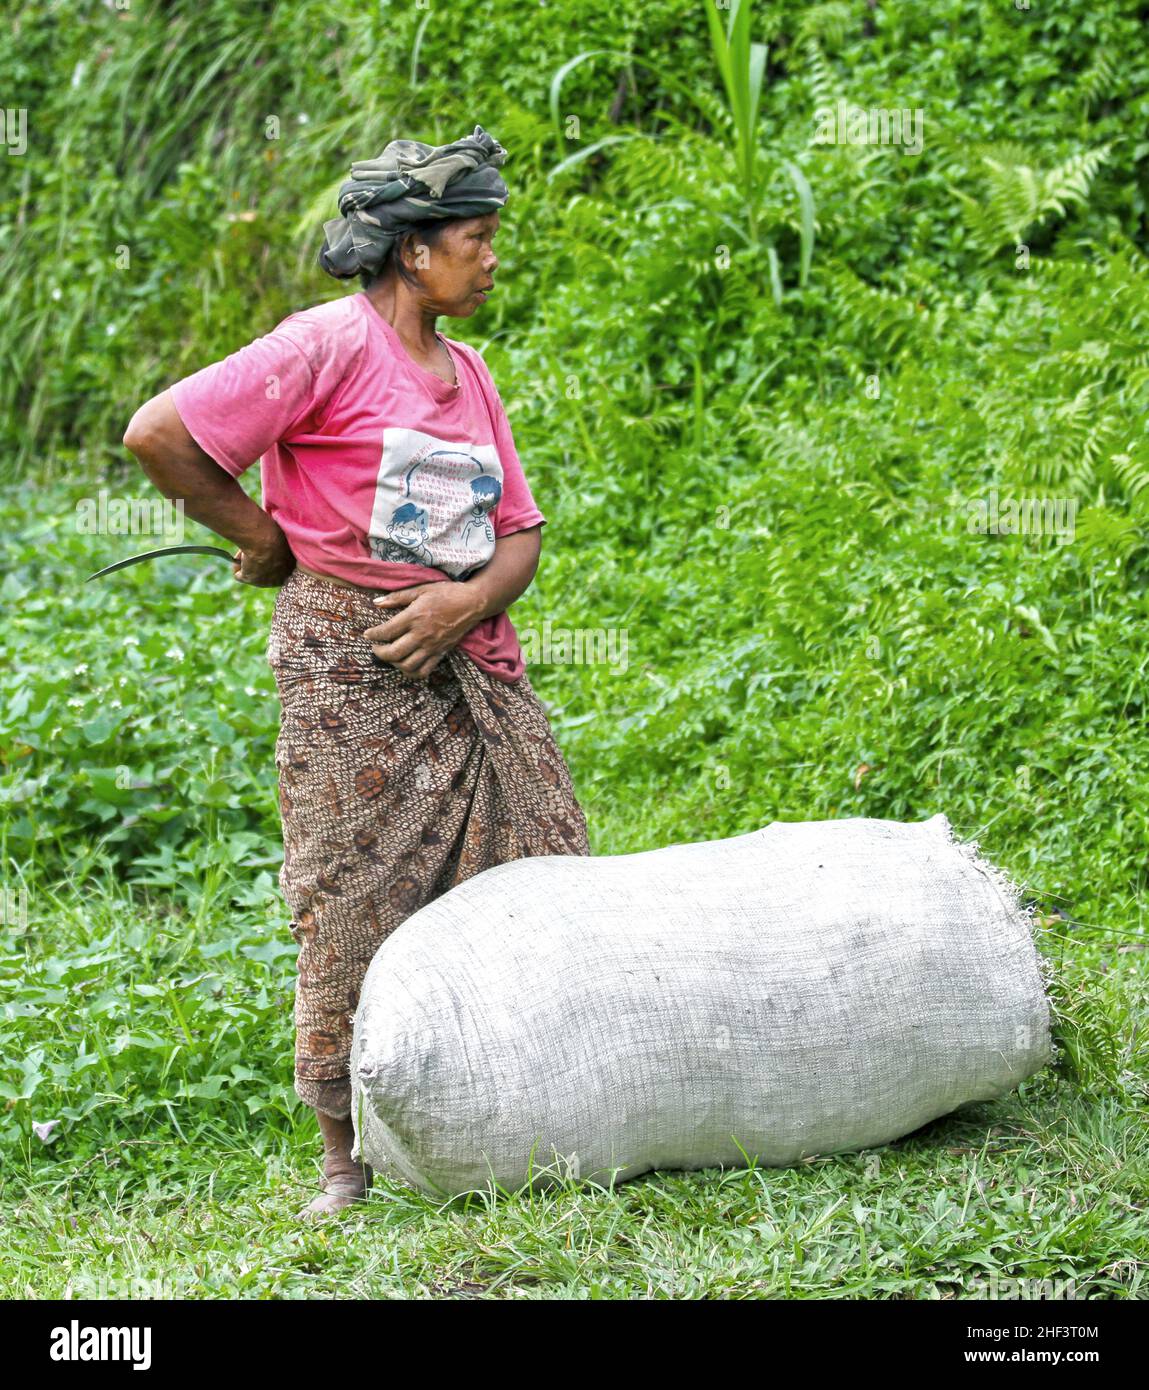 A Female Farmer Working In The Terraced Rice Paddies At Tegalallang In Ubud Bali Indonesia